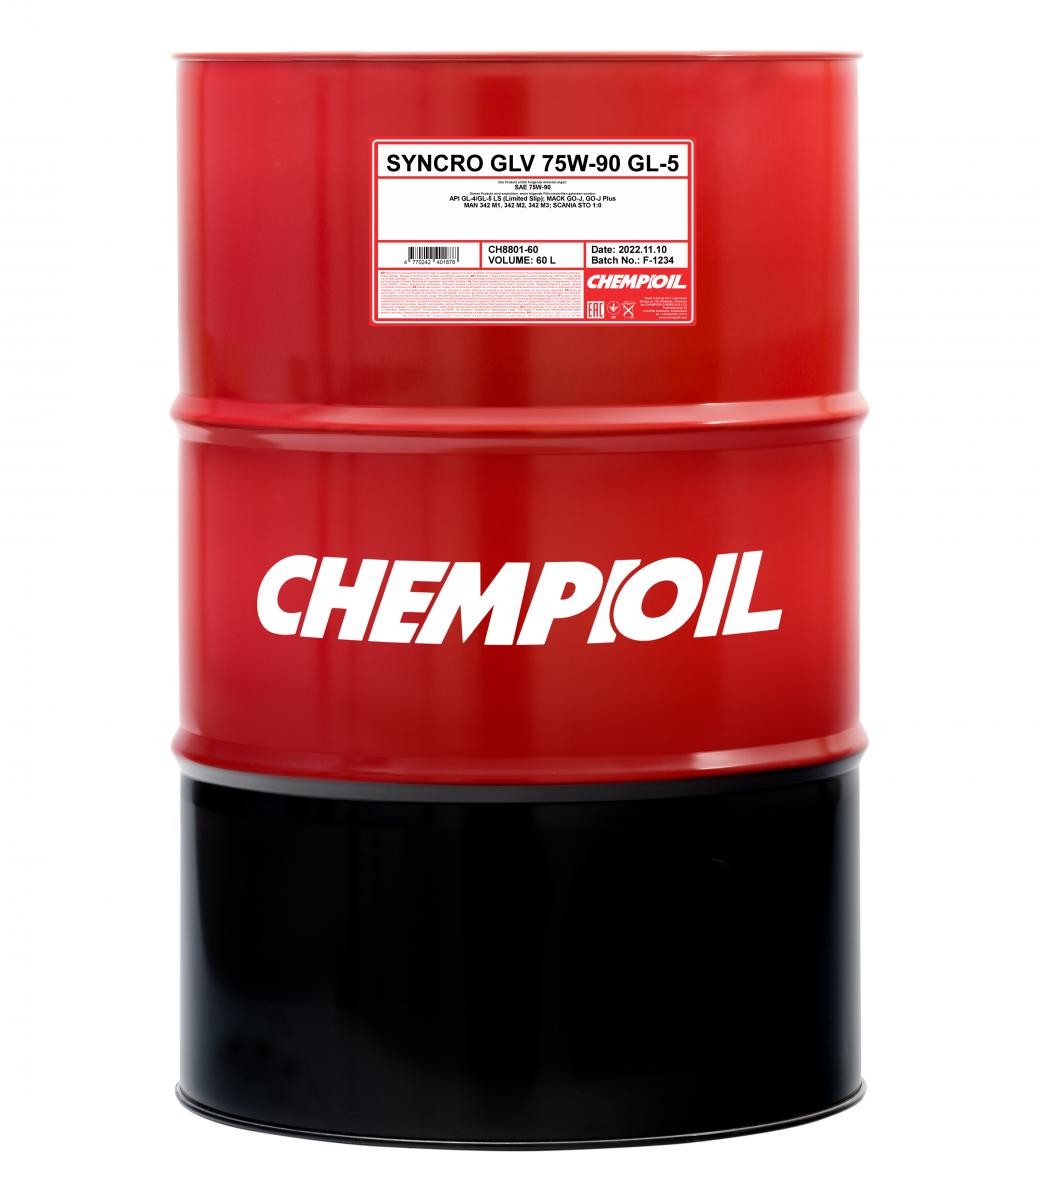 CHEMPIOIL Syncro, GLV GL-5 75W-90, Capacity: 60l API GL-4, API GL-5, Mack GO-J, Mack GO-J Plus, MAN 342 M1, MAN 342 M2, MAN 342 M3, Scania STO 1:0, Manual Transmission, Differential Gear with limited slip Transmission oil CH8801-60 buy